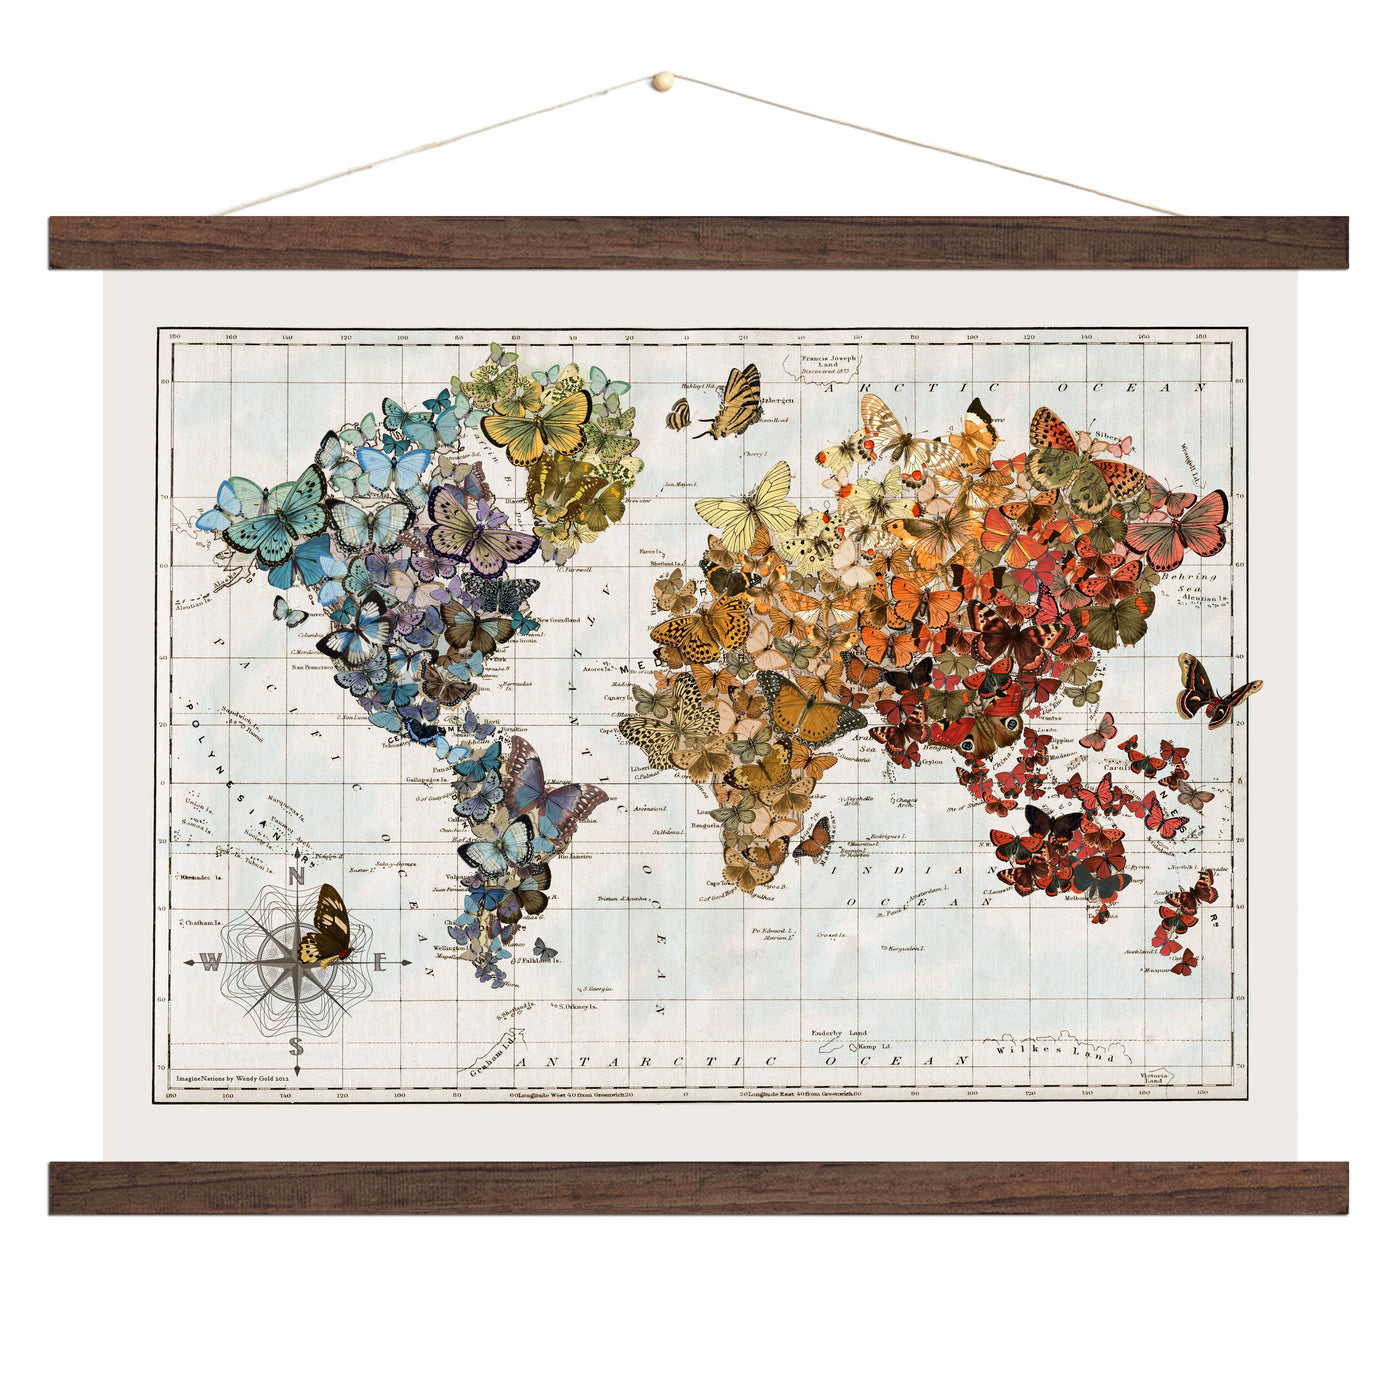 Butterfly Migration World Map Collage Art Wood Bound Canvas